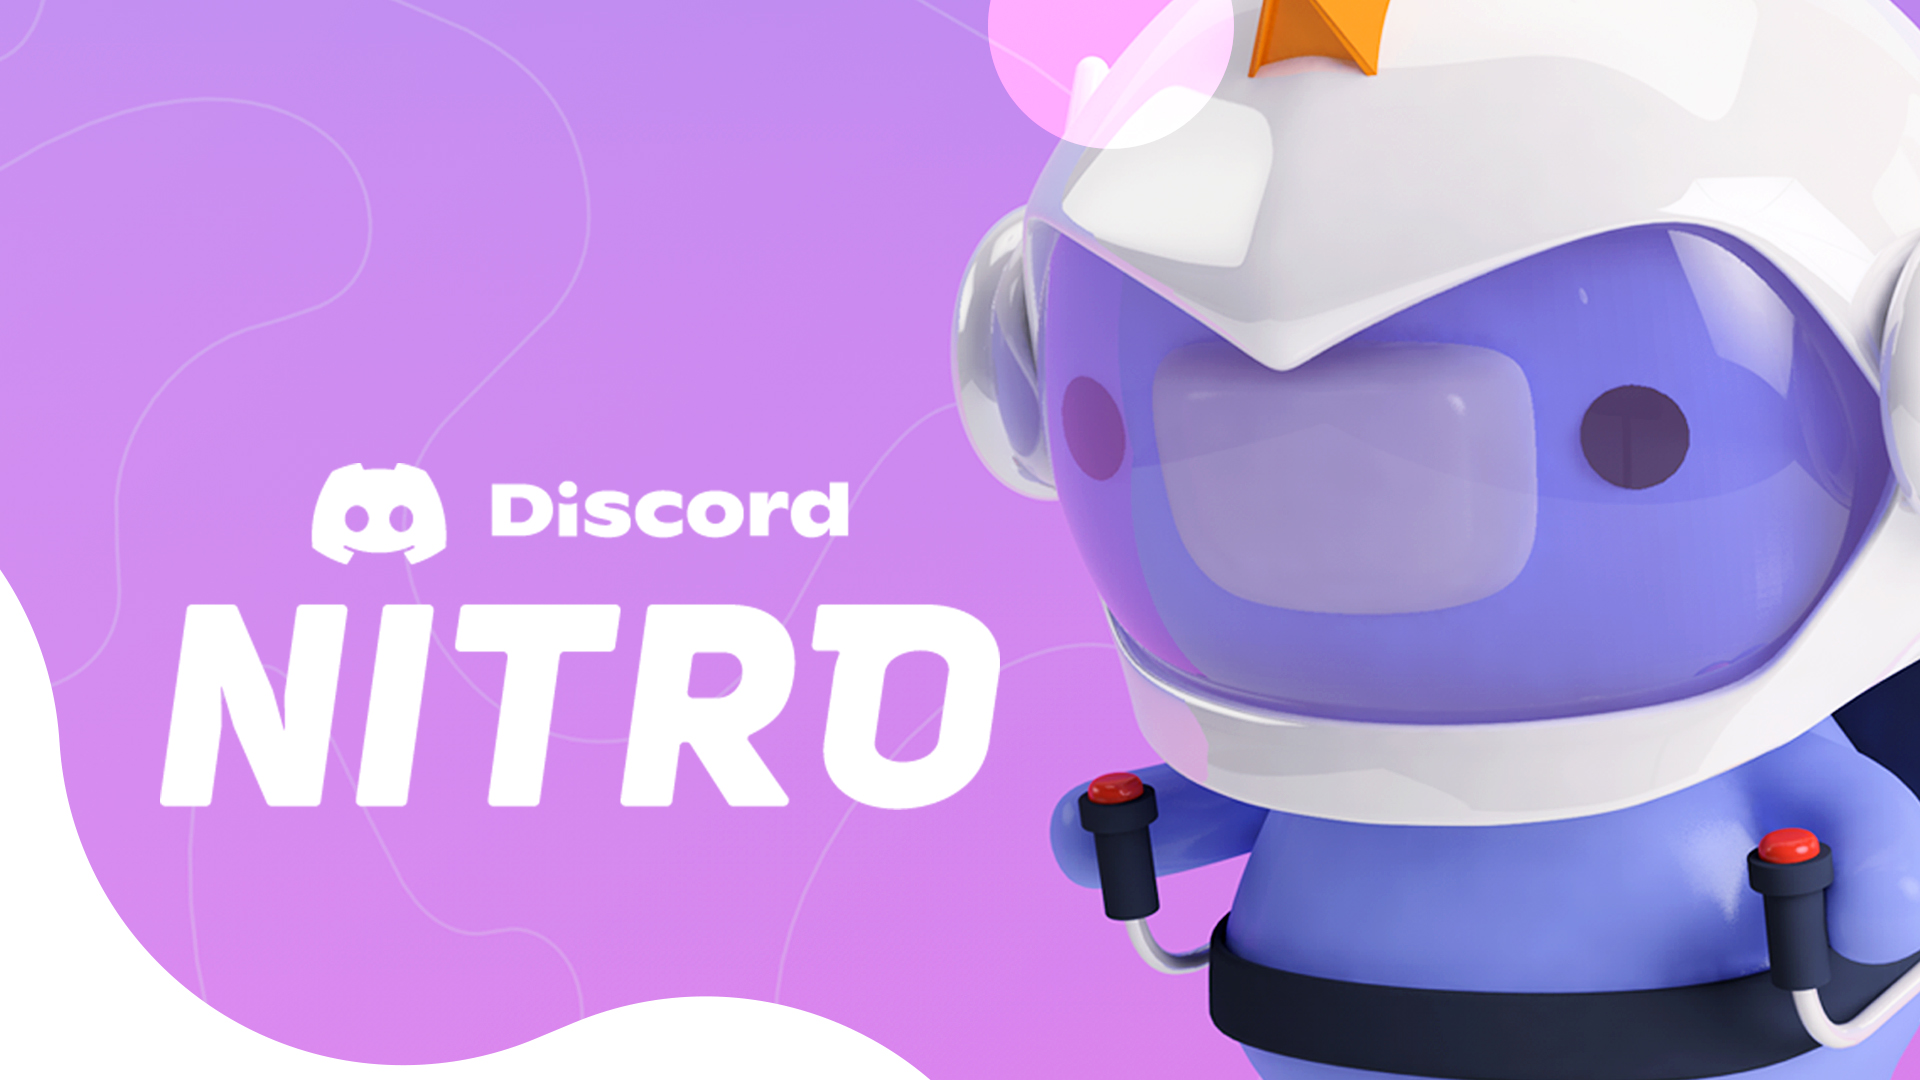 What is Discord Nitro, and should you get it?